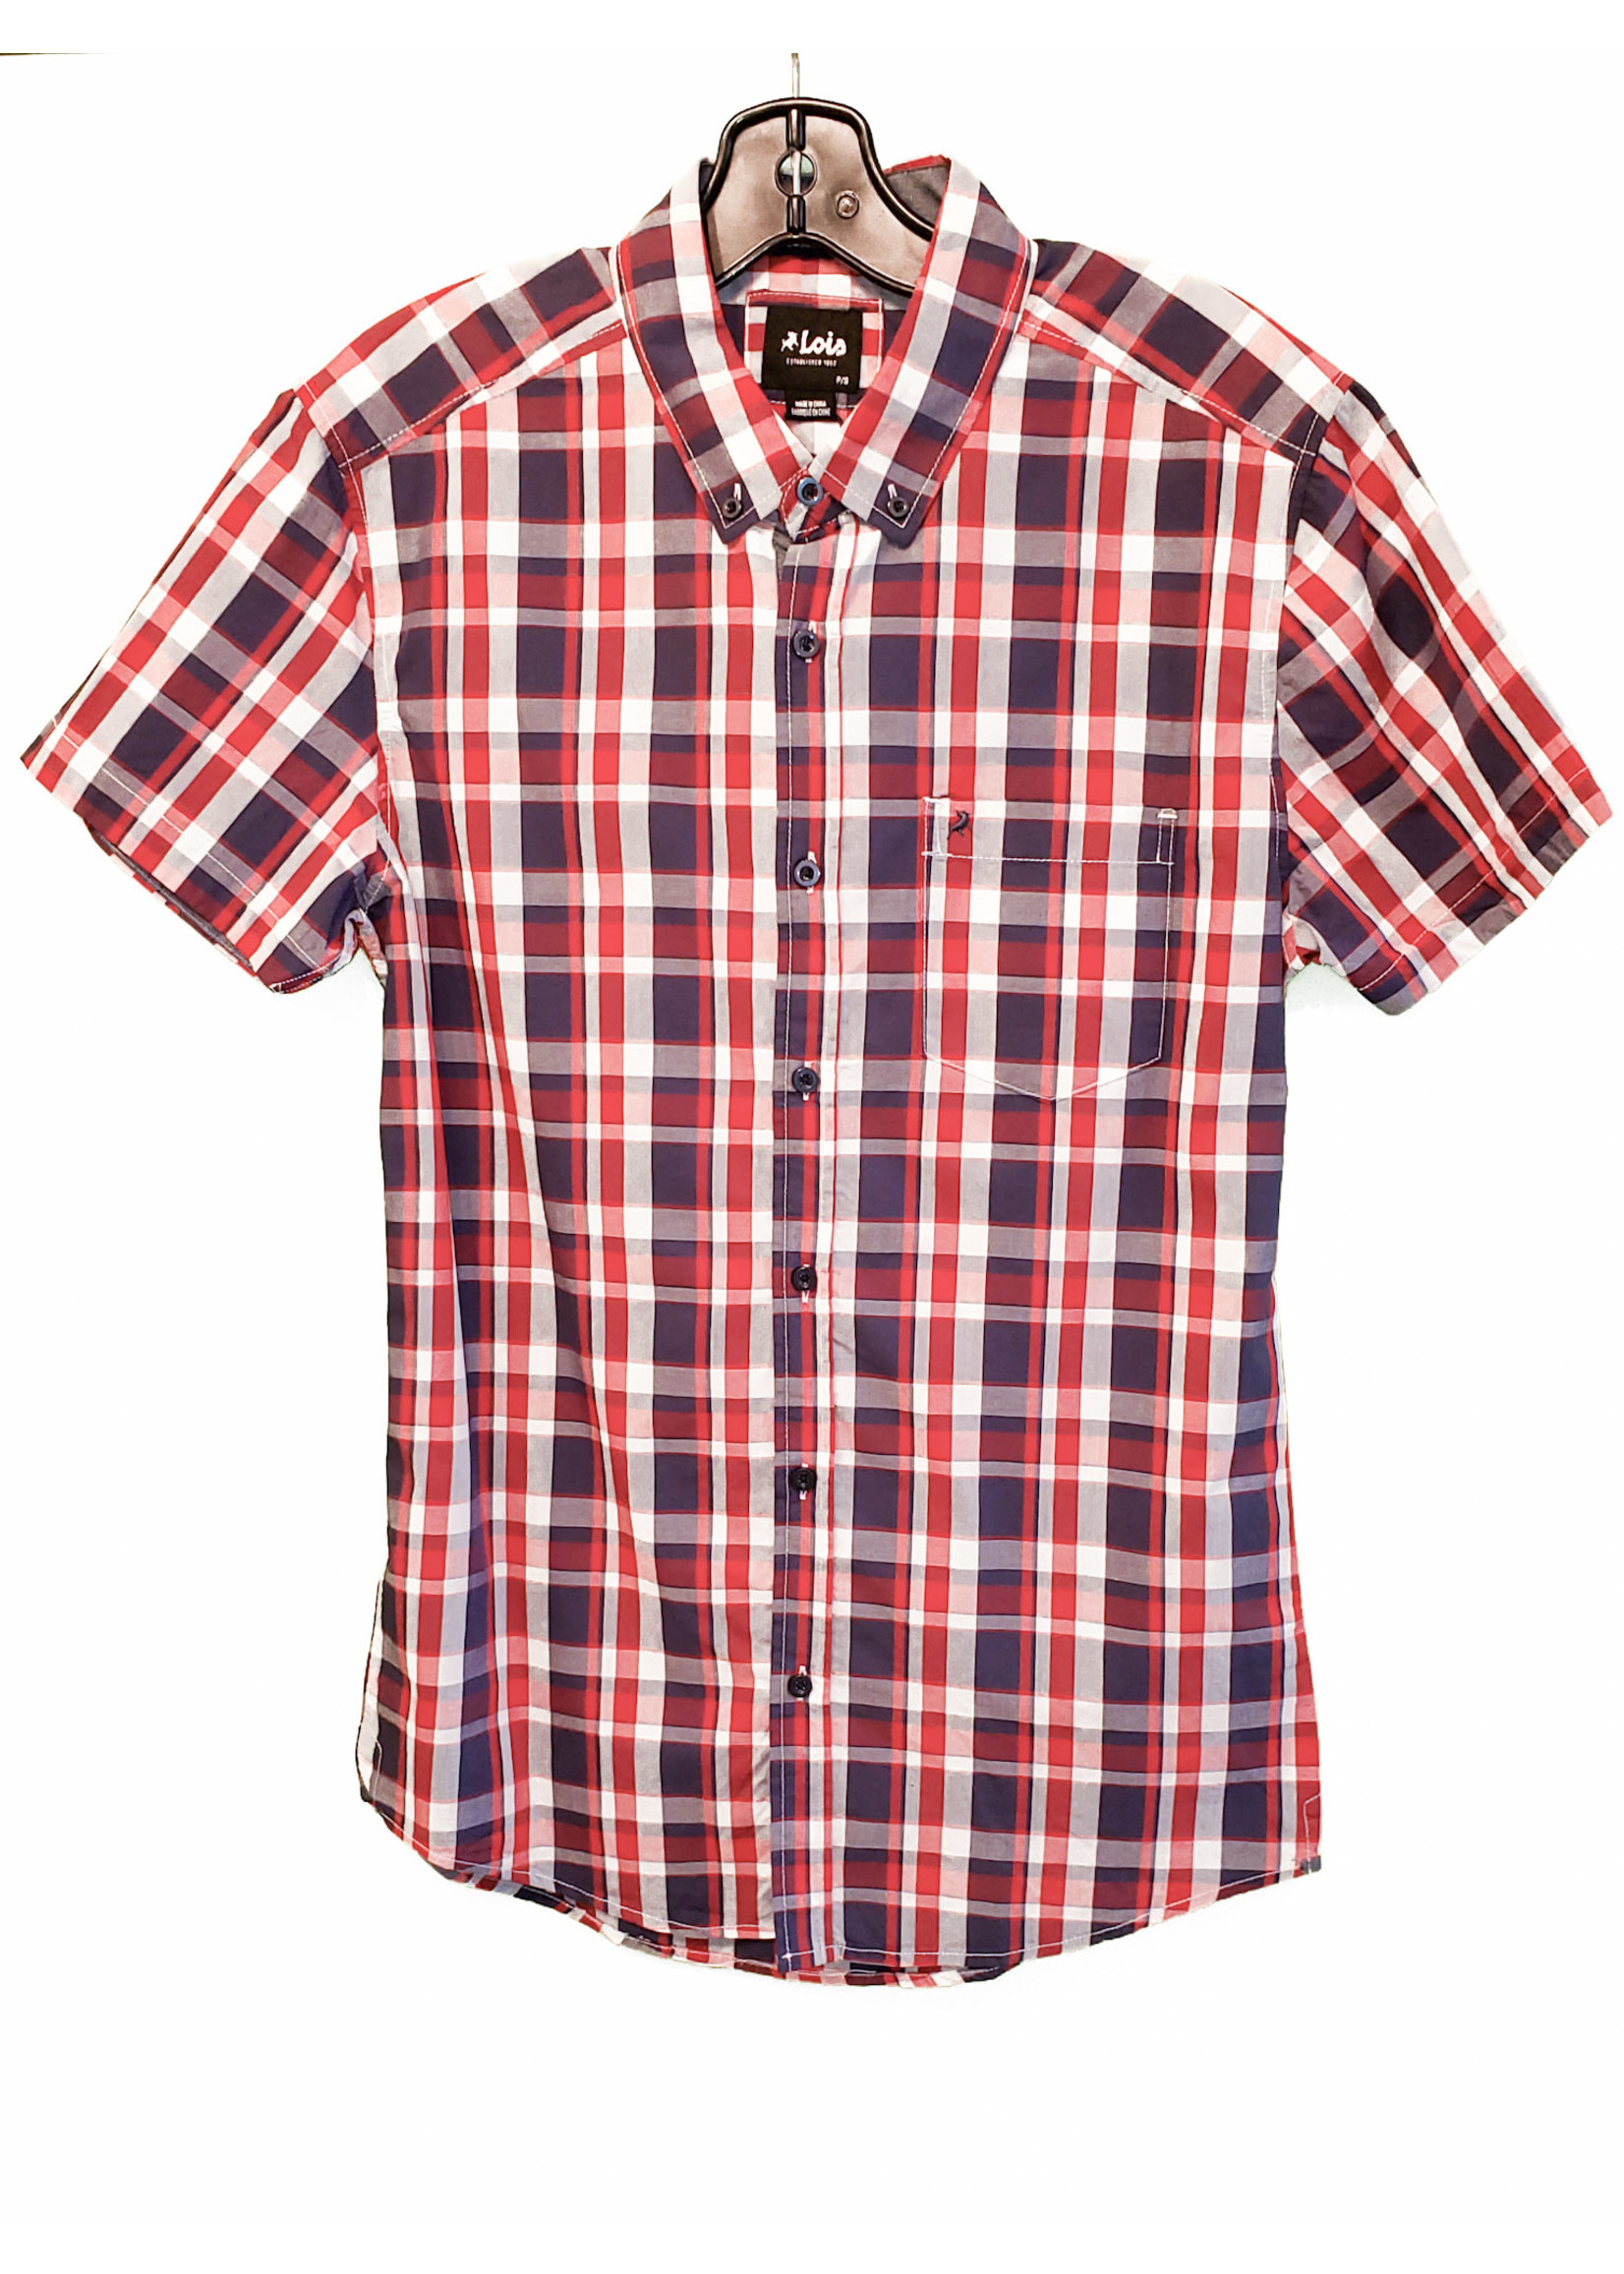 Lois 14017 s/s button plaid shirt with front pocket